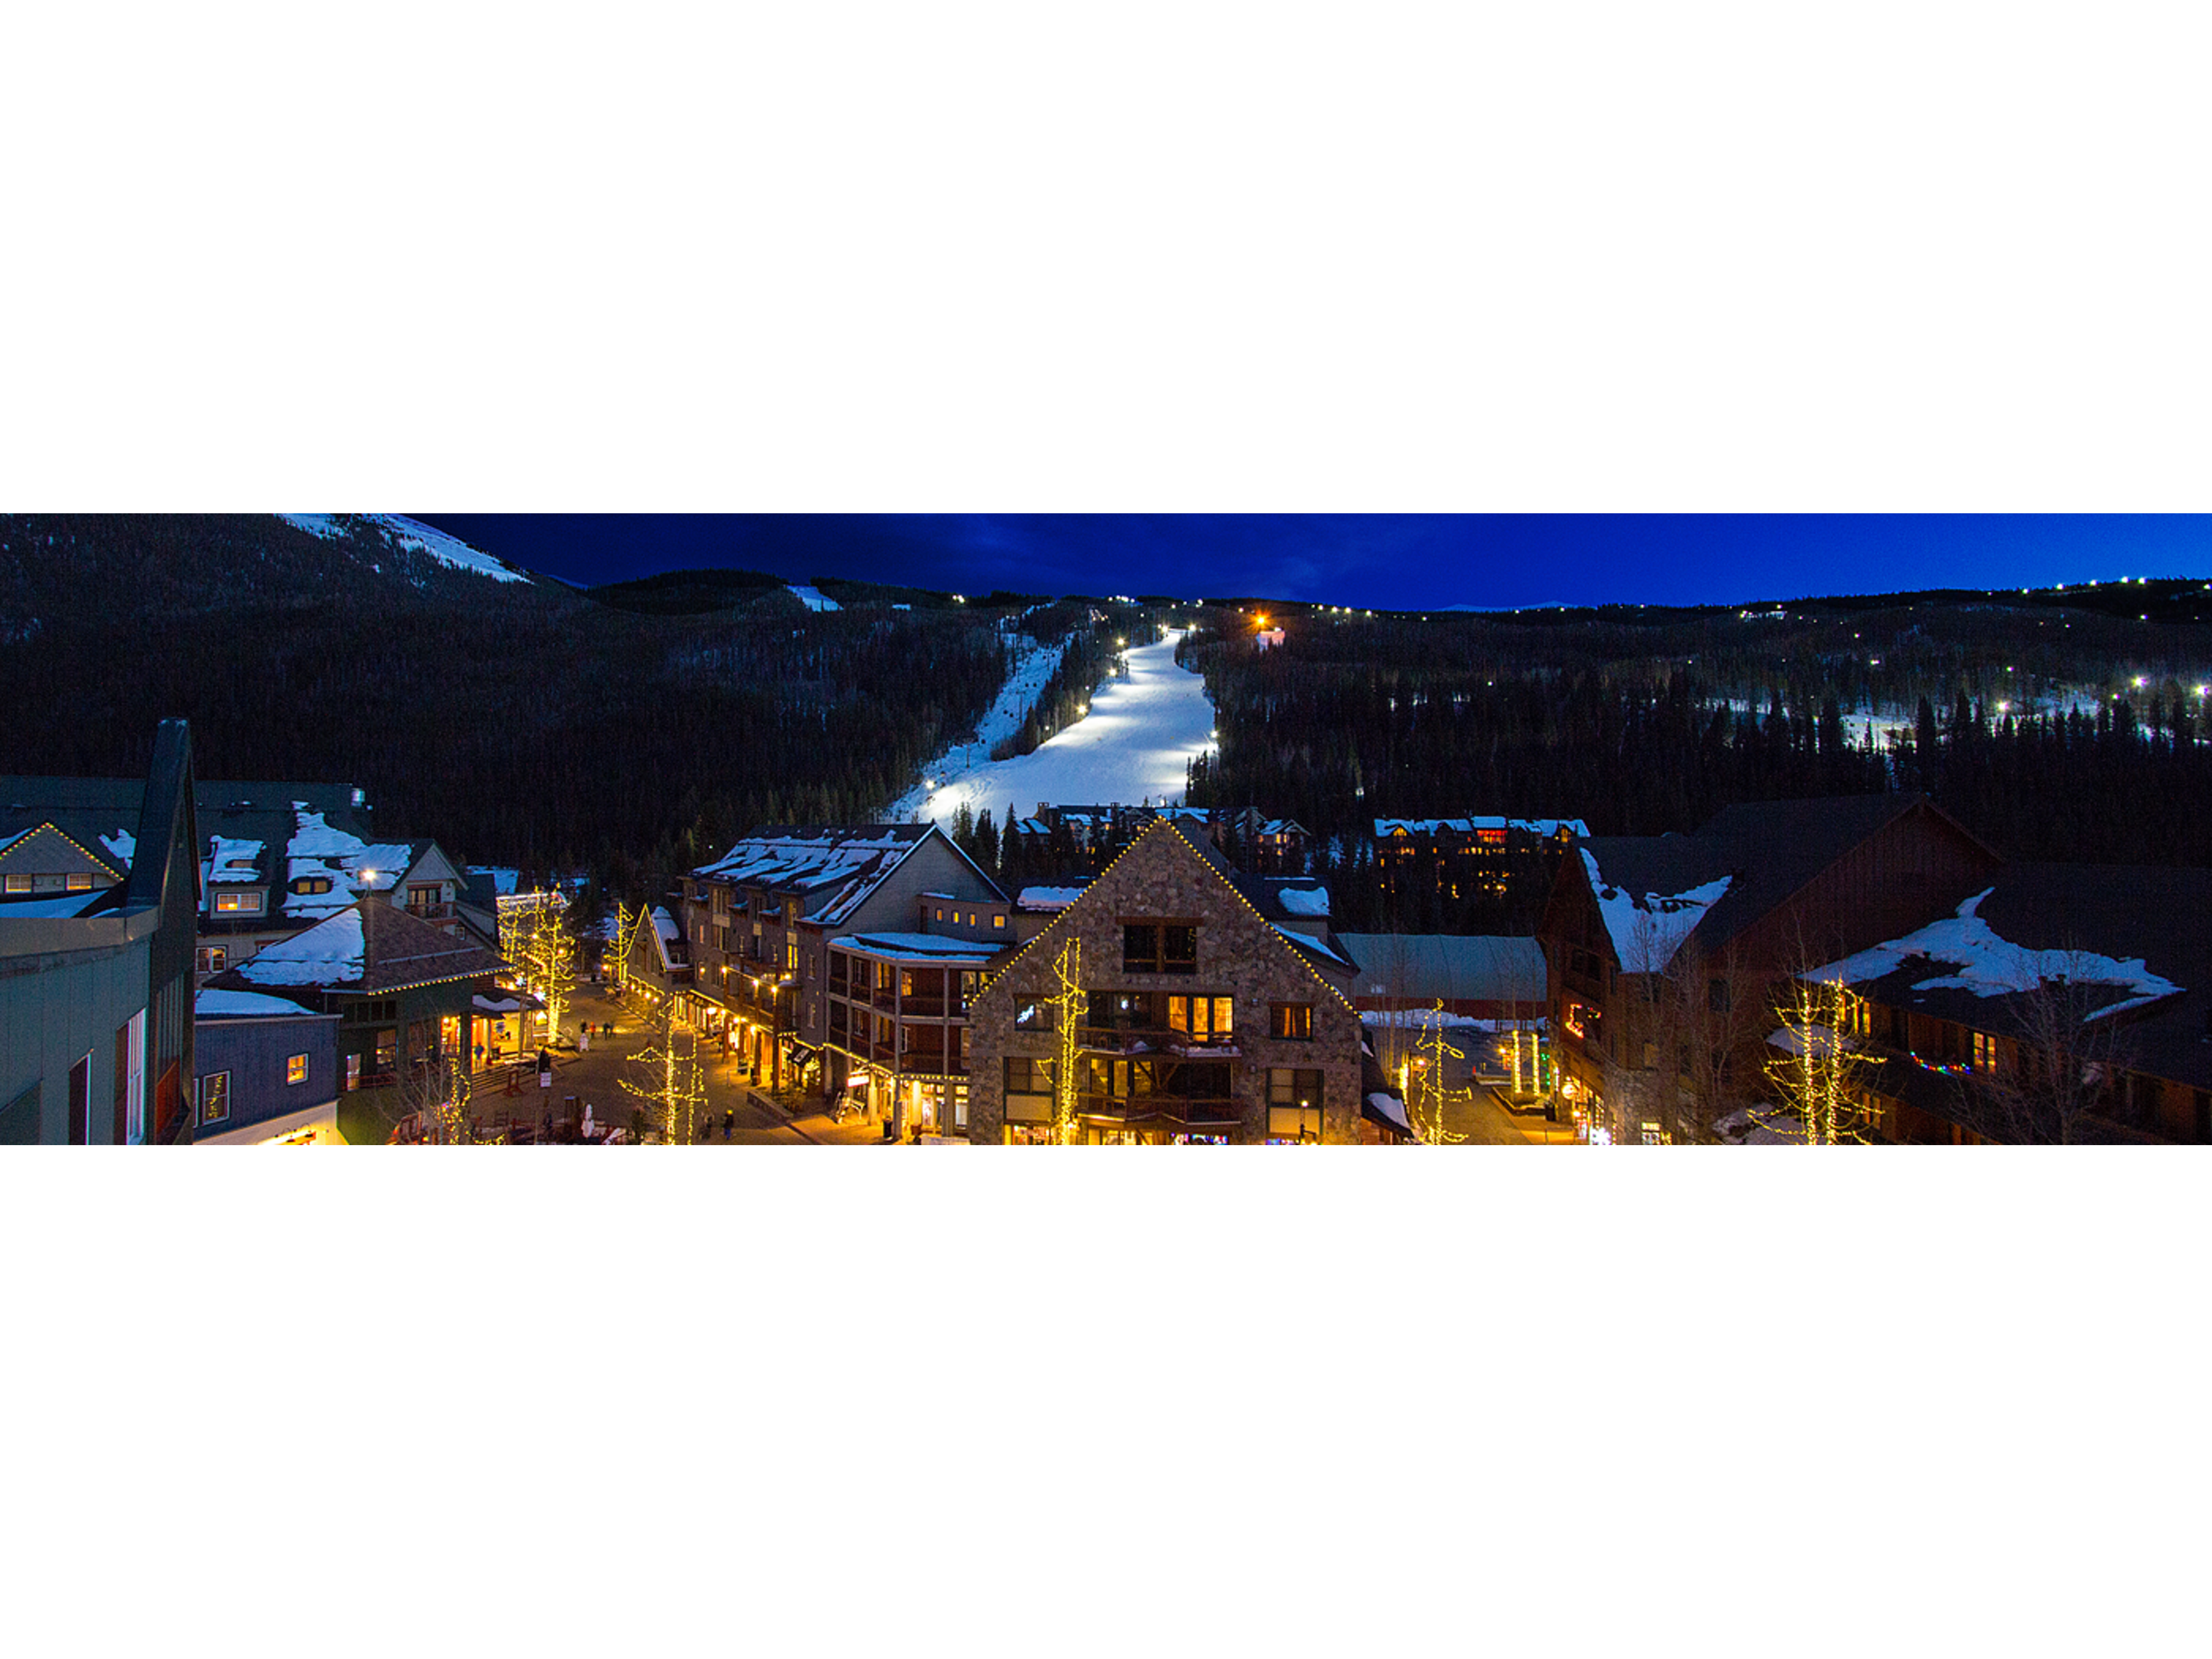 Keystone, Colorado: How to Choose the Right Area to Live